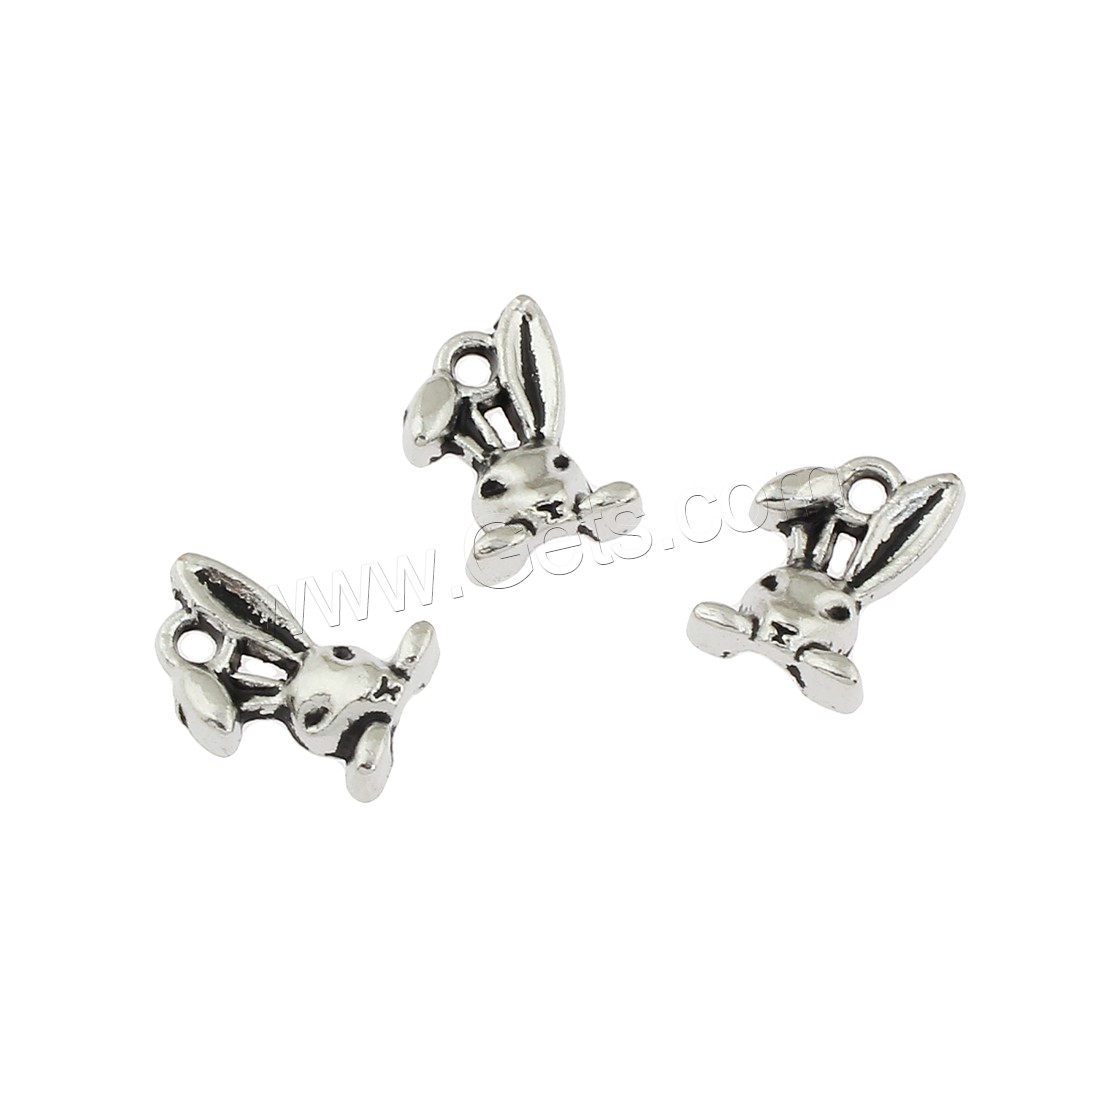 Zinc Alloy Animal Pendants, Rabbit, antique silver color plated, 9x13x3mm, Hole:Approx 1mm, Approx 550PCs/Bag, Sold By Bag